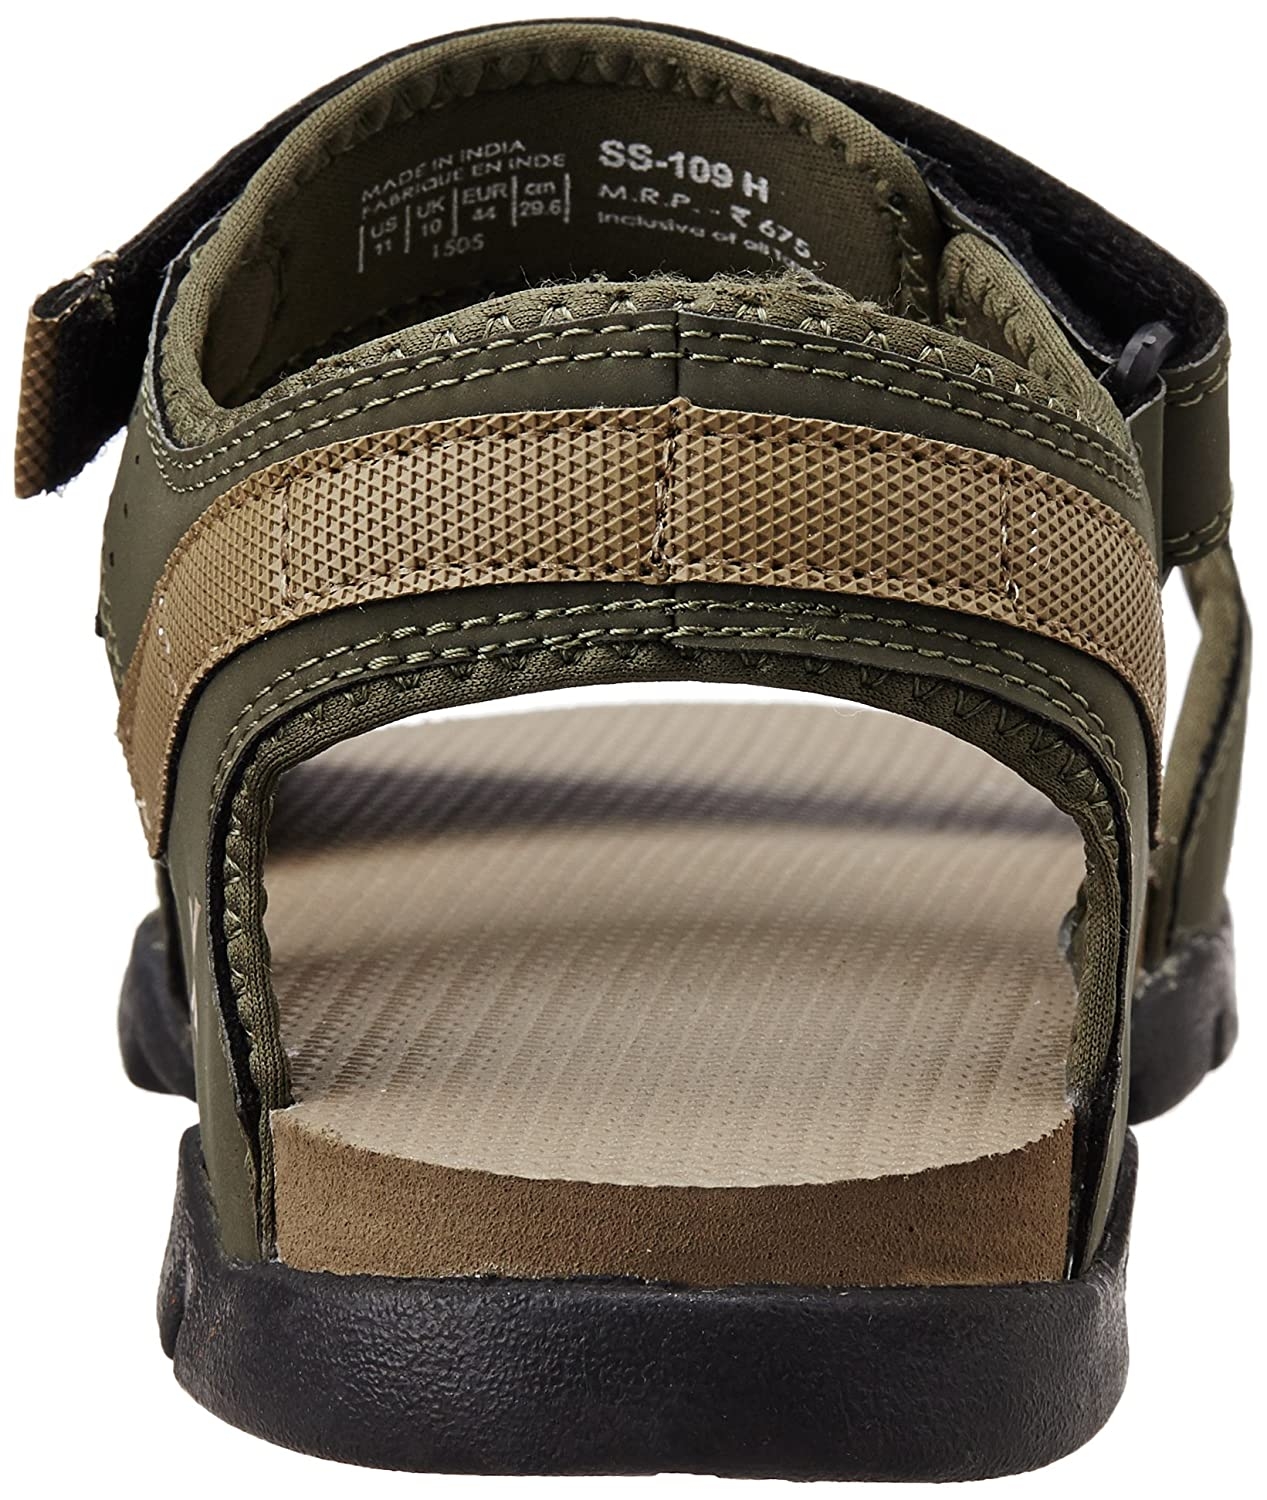 2021 Lowest Price] Sparx Men Sandals Price in India & Specifications